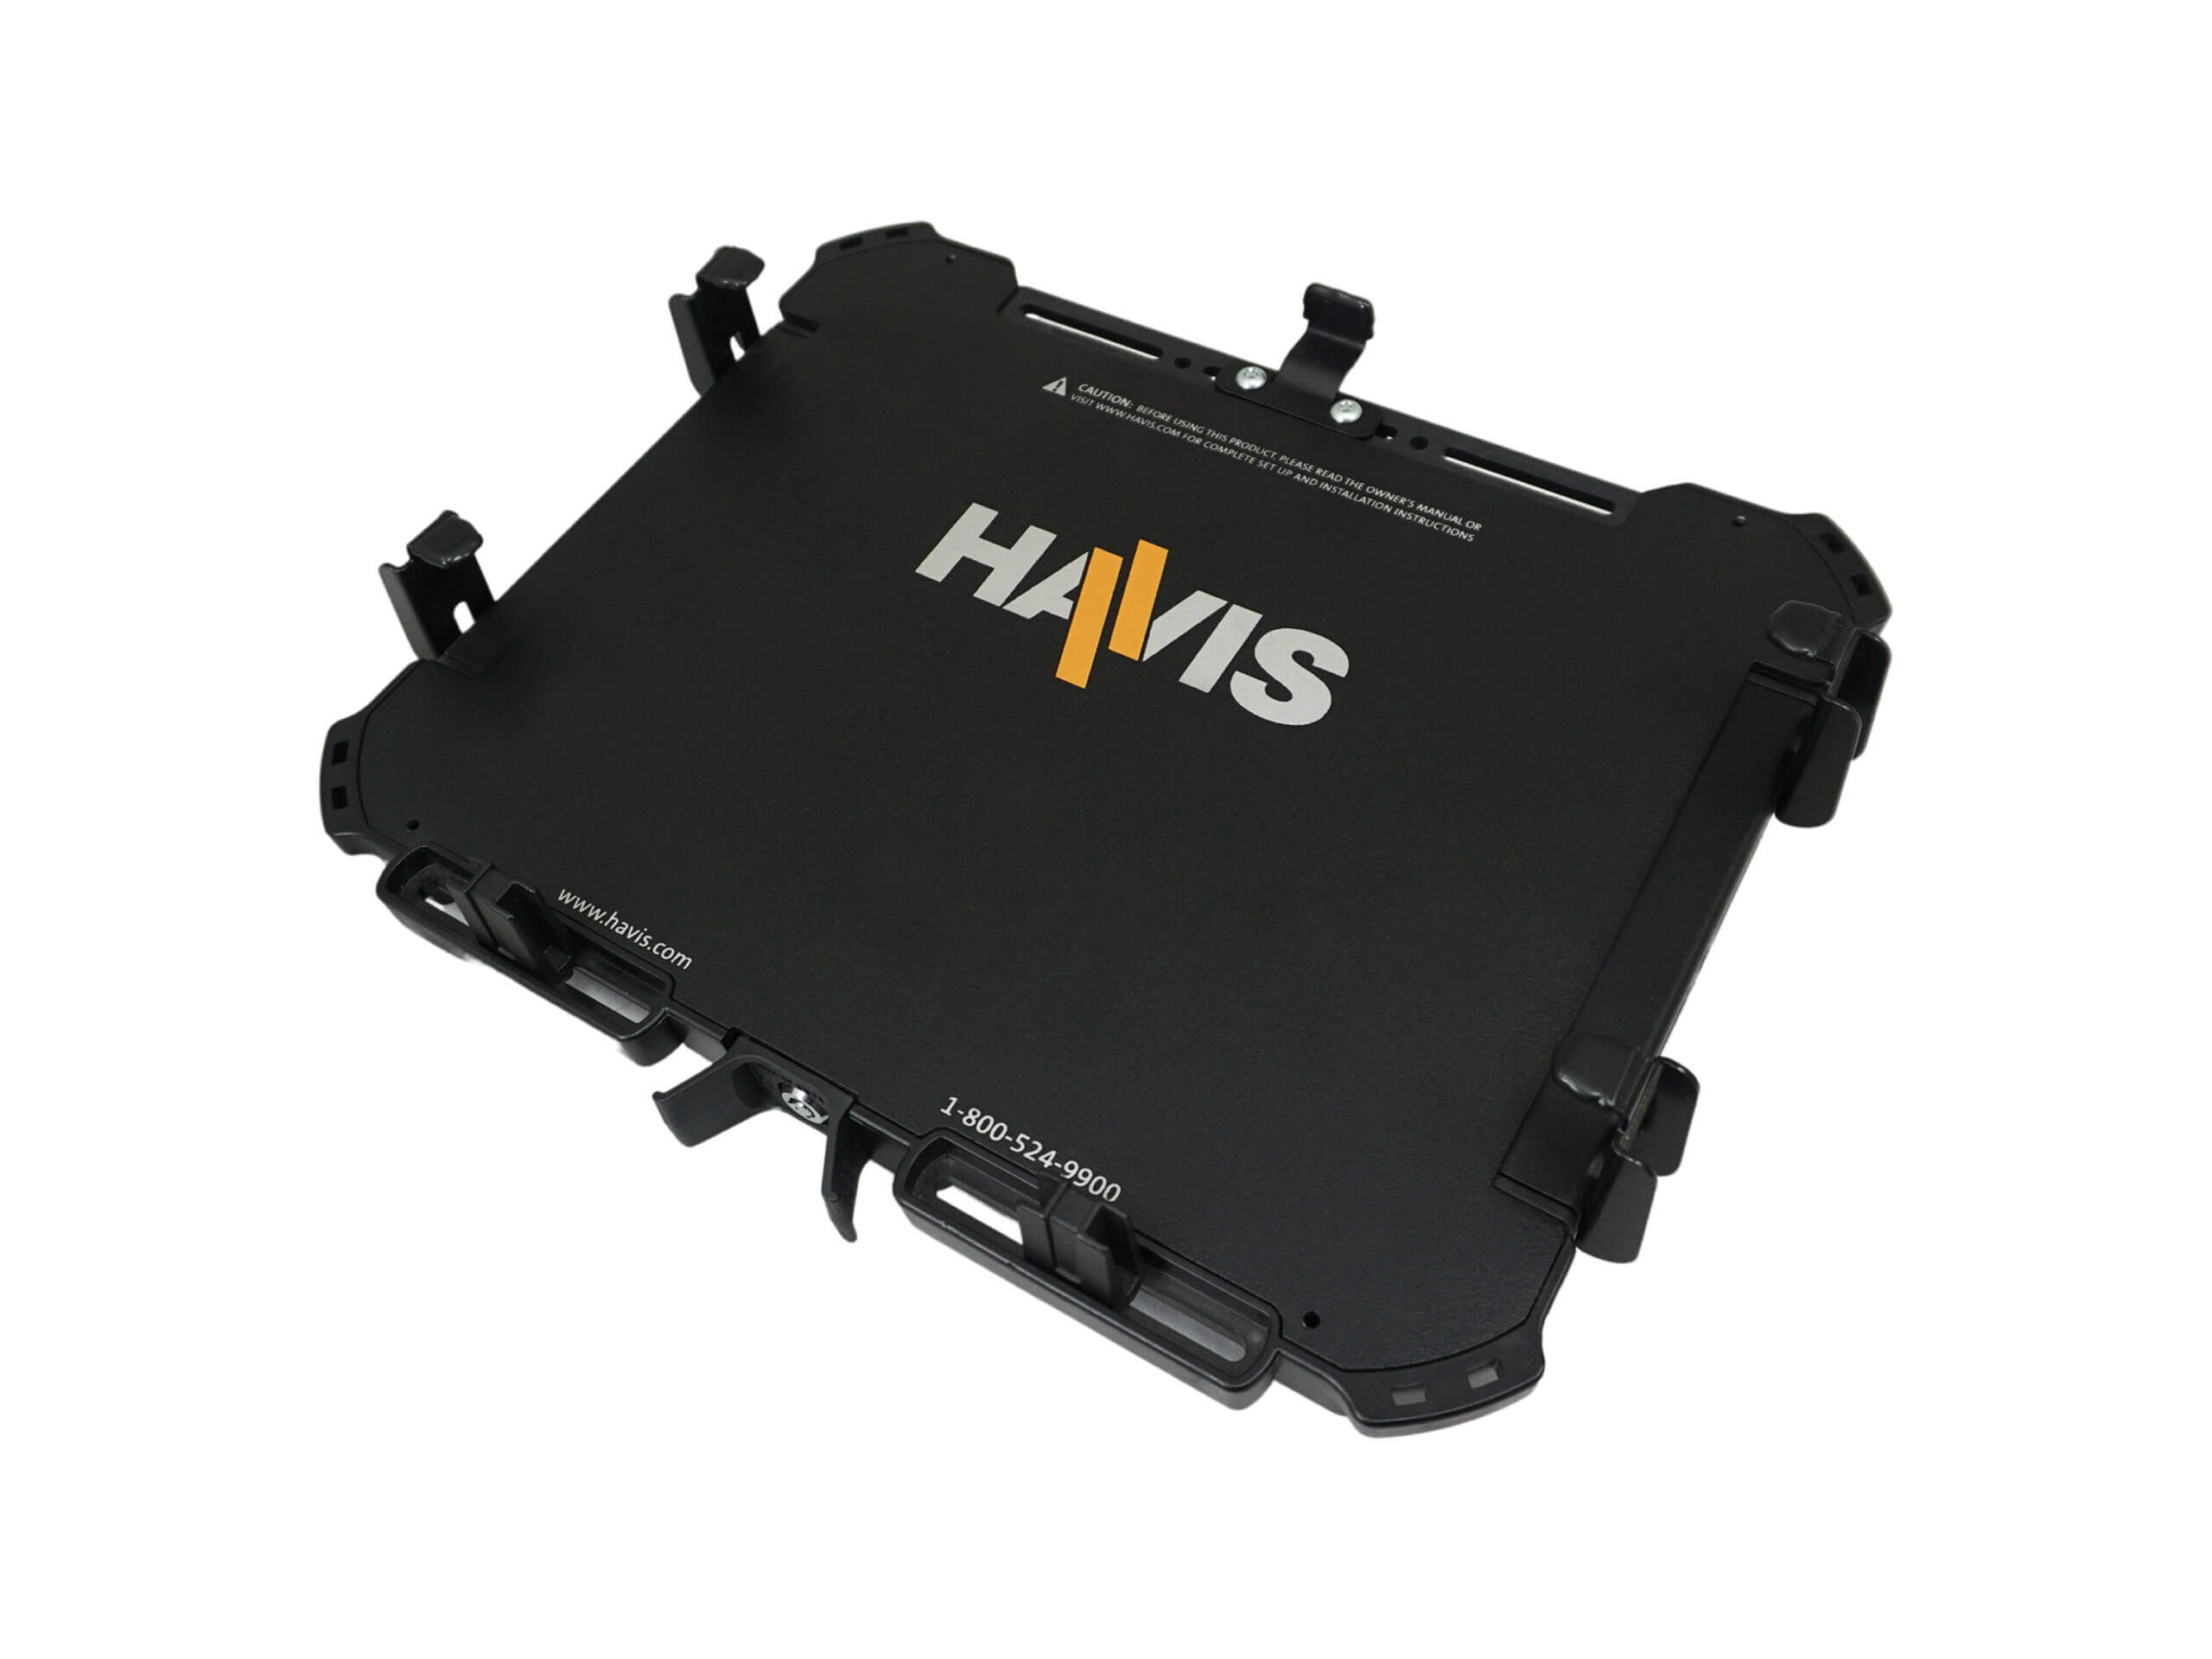 Havis Rugged Cradle for Dell 5430 and 7330 Rugged Notebooks